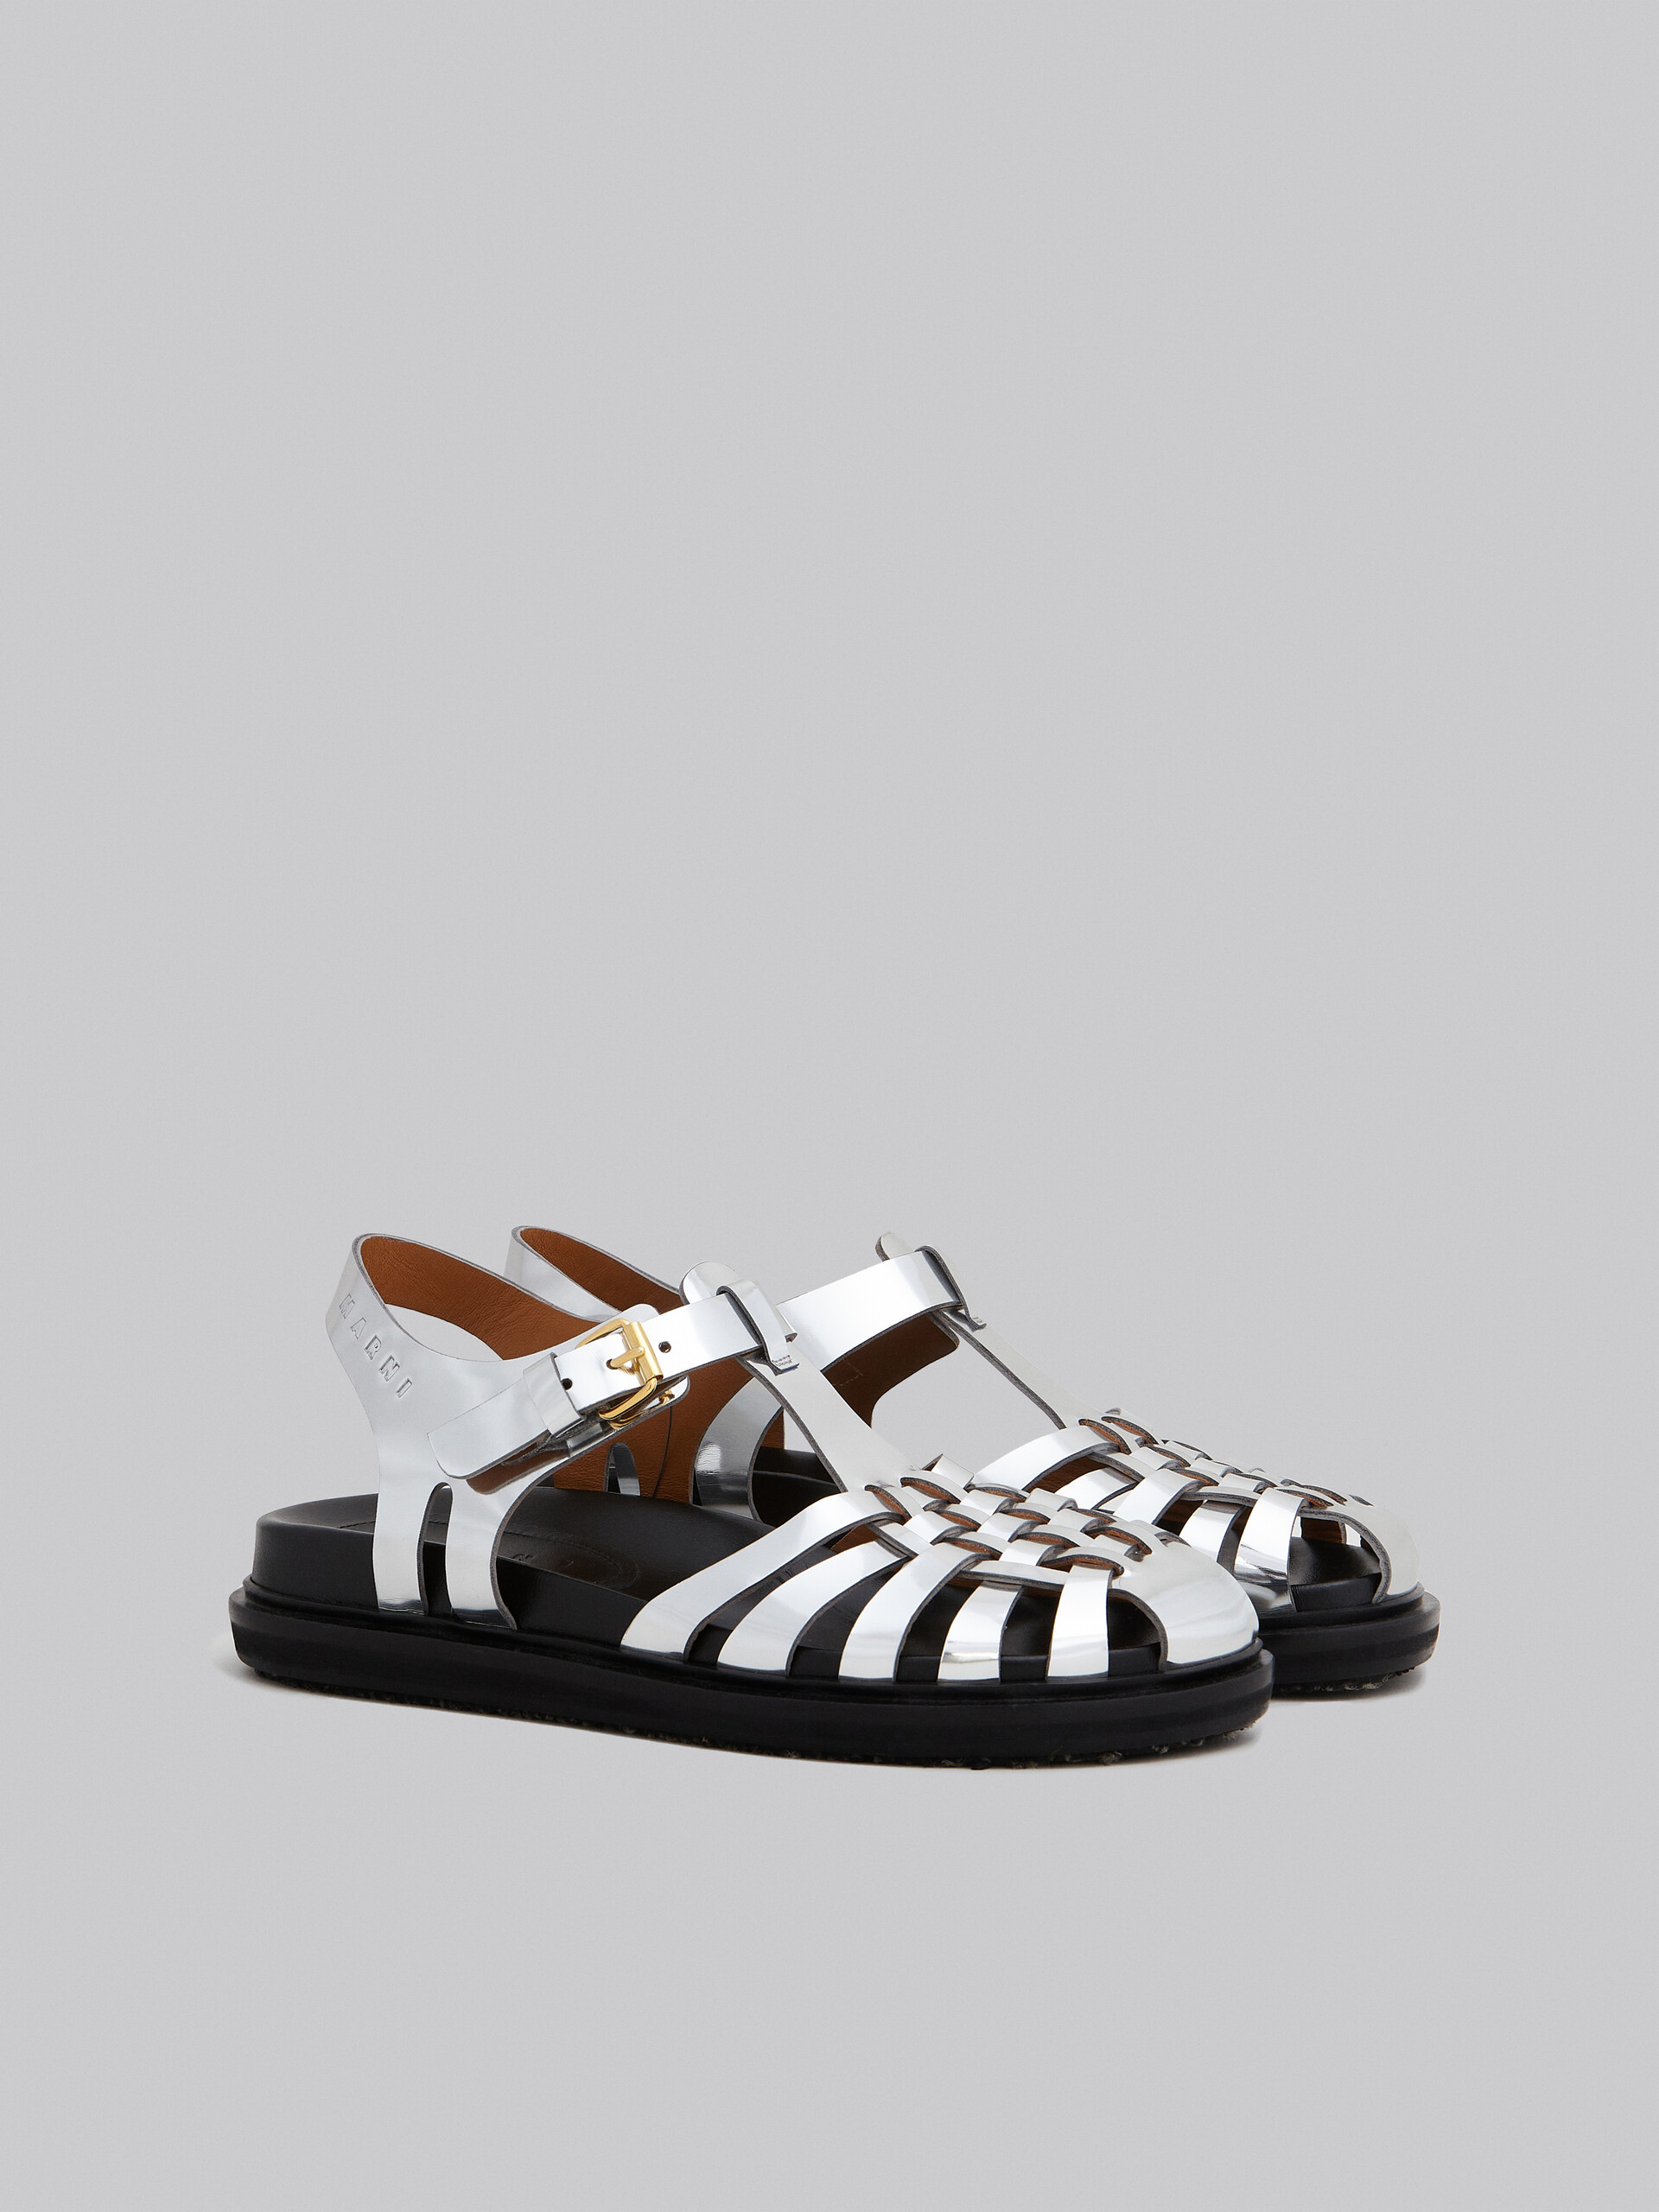 Silver mirrored leather fisherman's sandal - Sandals - Image 2